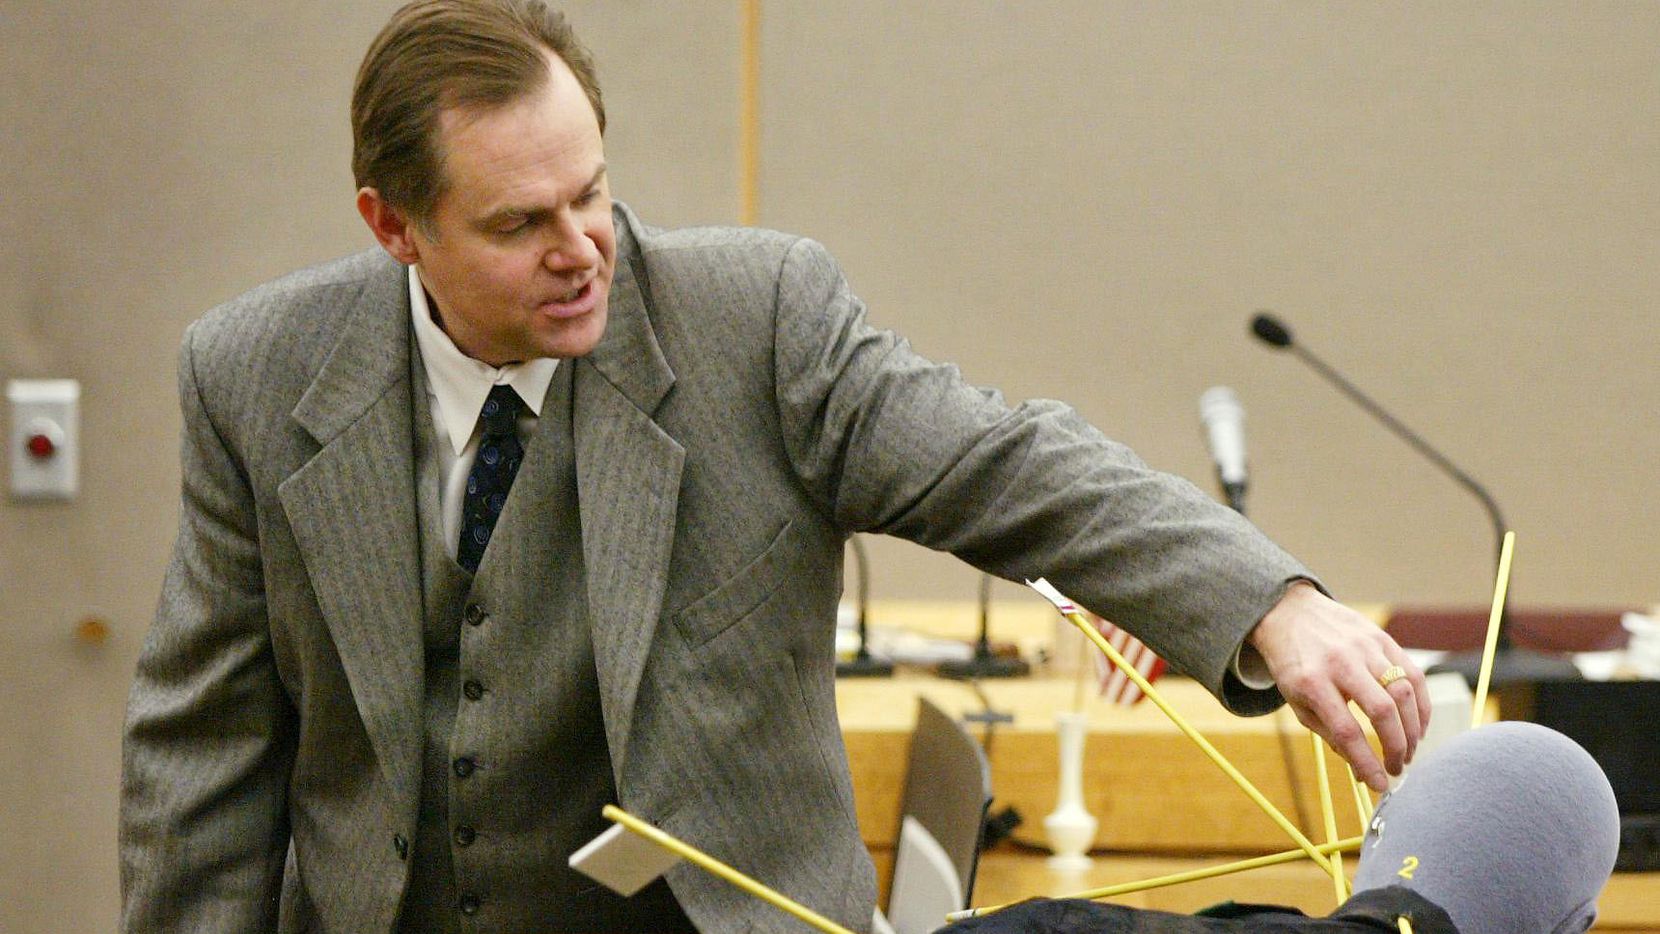 Dr. Jeffrey Barnard testifies during the January 2002 murder trial of "Texas 7" escapee Donald Newbury about the gunshot wounds that killed Irving police Officer Aubrey Hawkins on Christmas Eve 2000. Newbury was sentenced to death and was executed in February 2015.